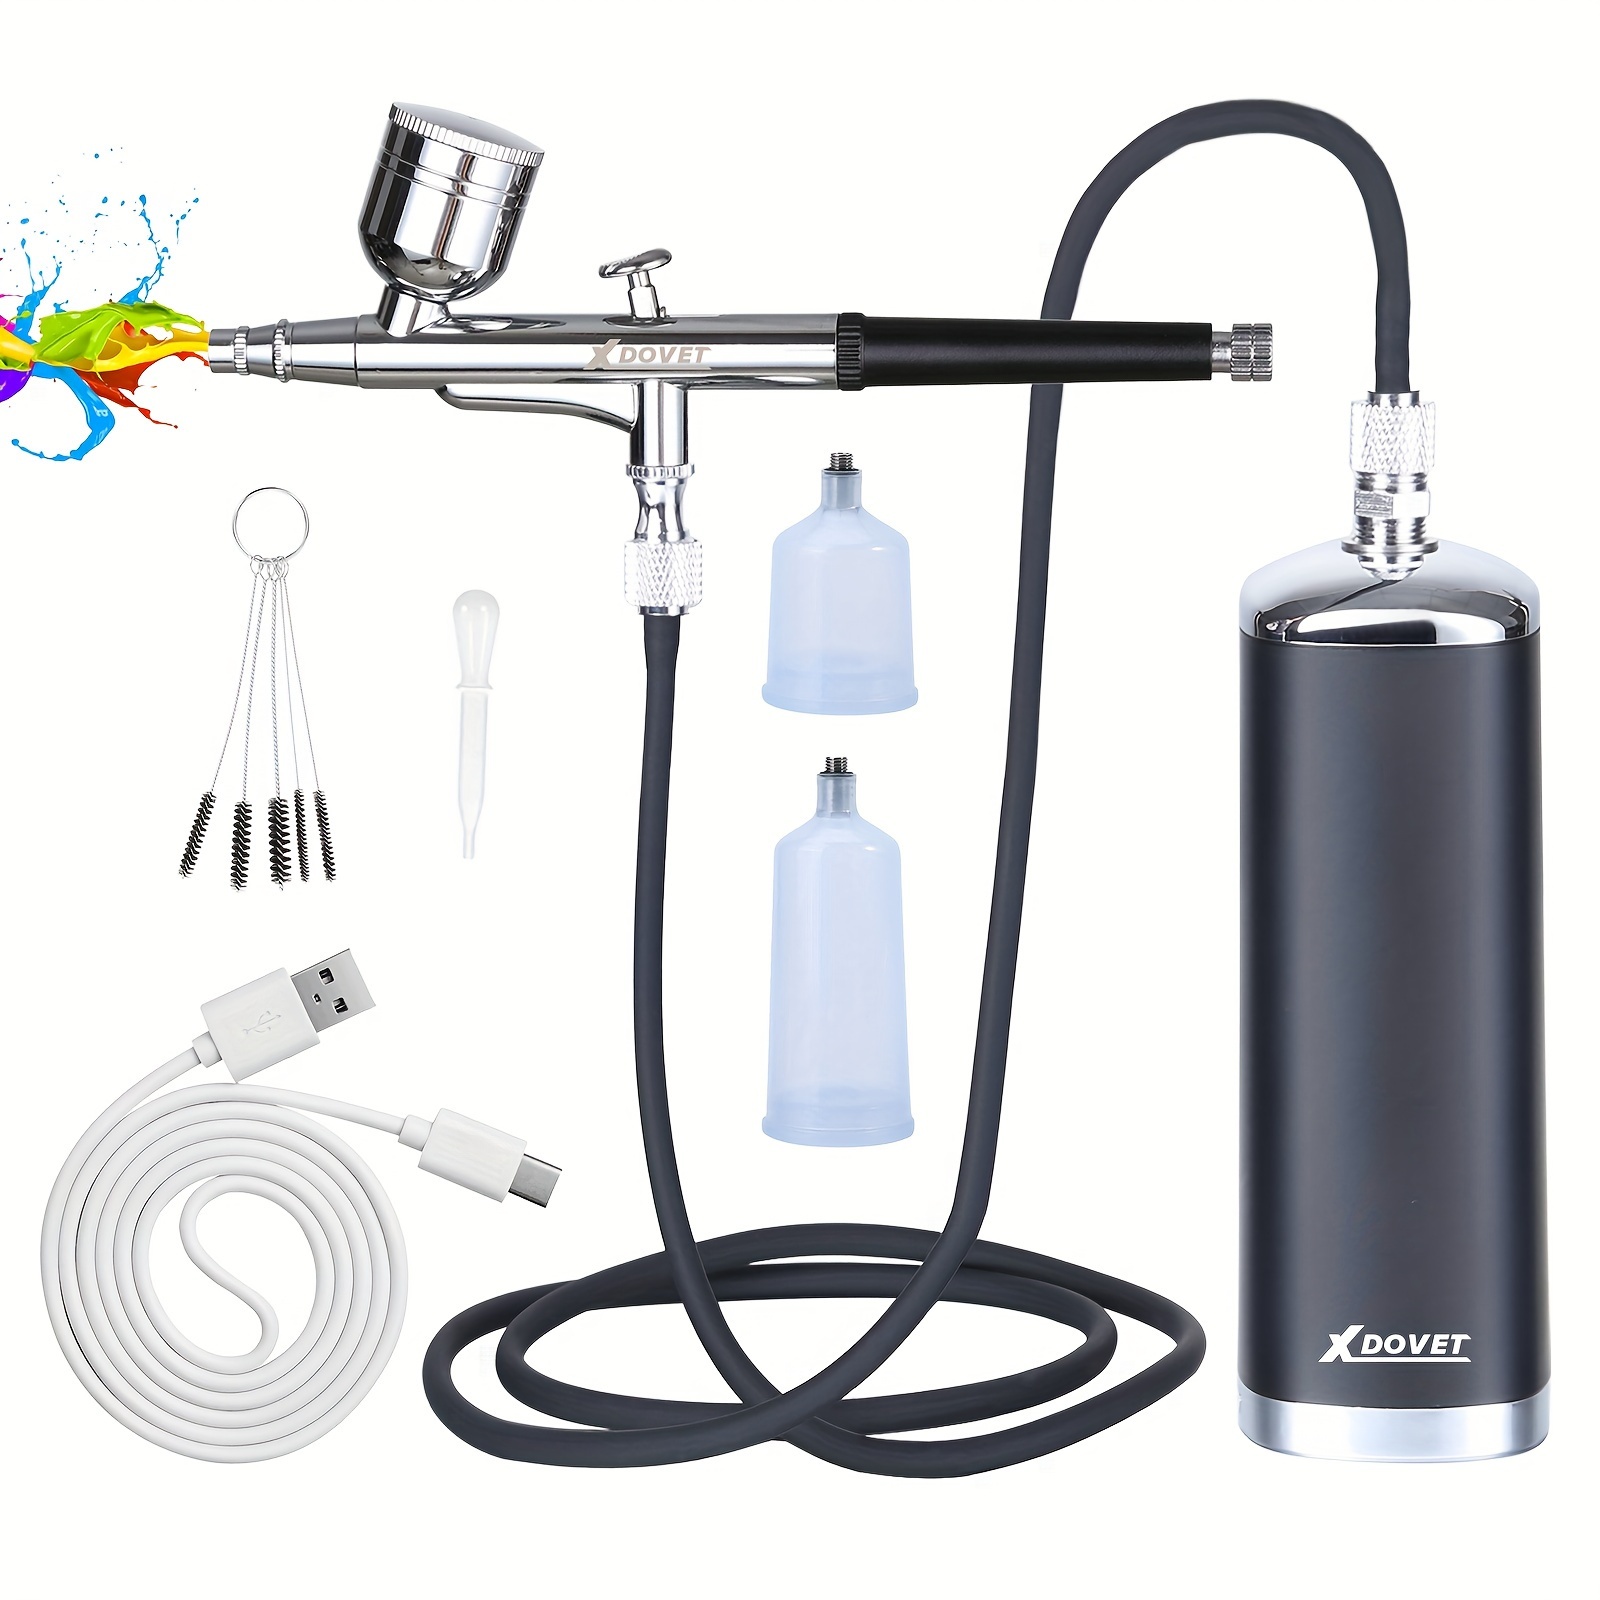 SAGUD Professional Airbrush Kit with Compressor - Gravity and Siphon Feed Air Brush Painting Set with 6 Colors Acrylic Airbrush Paint Set and Accessor